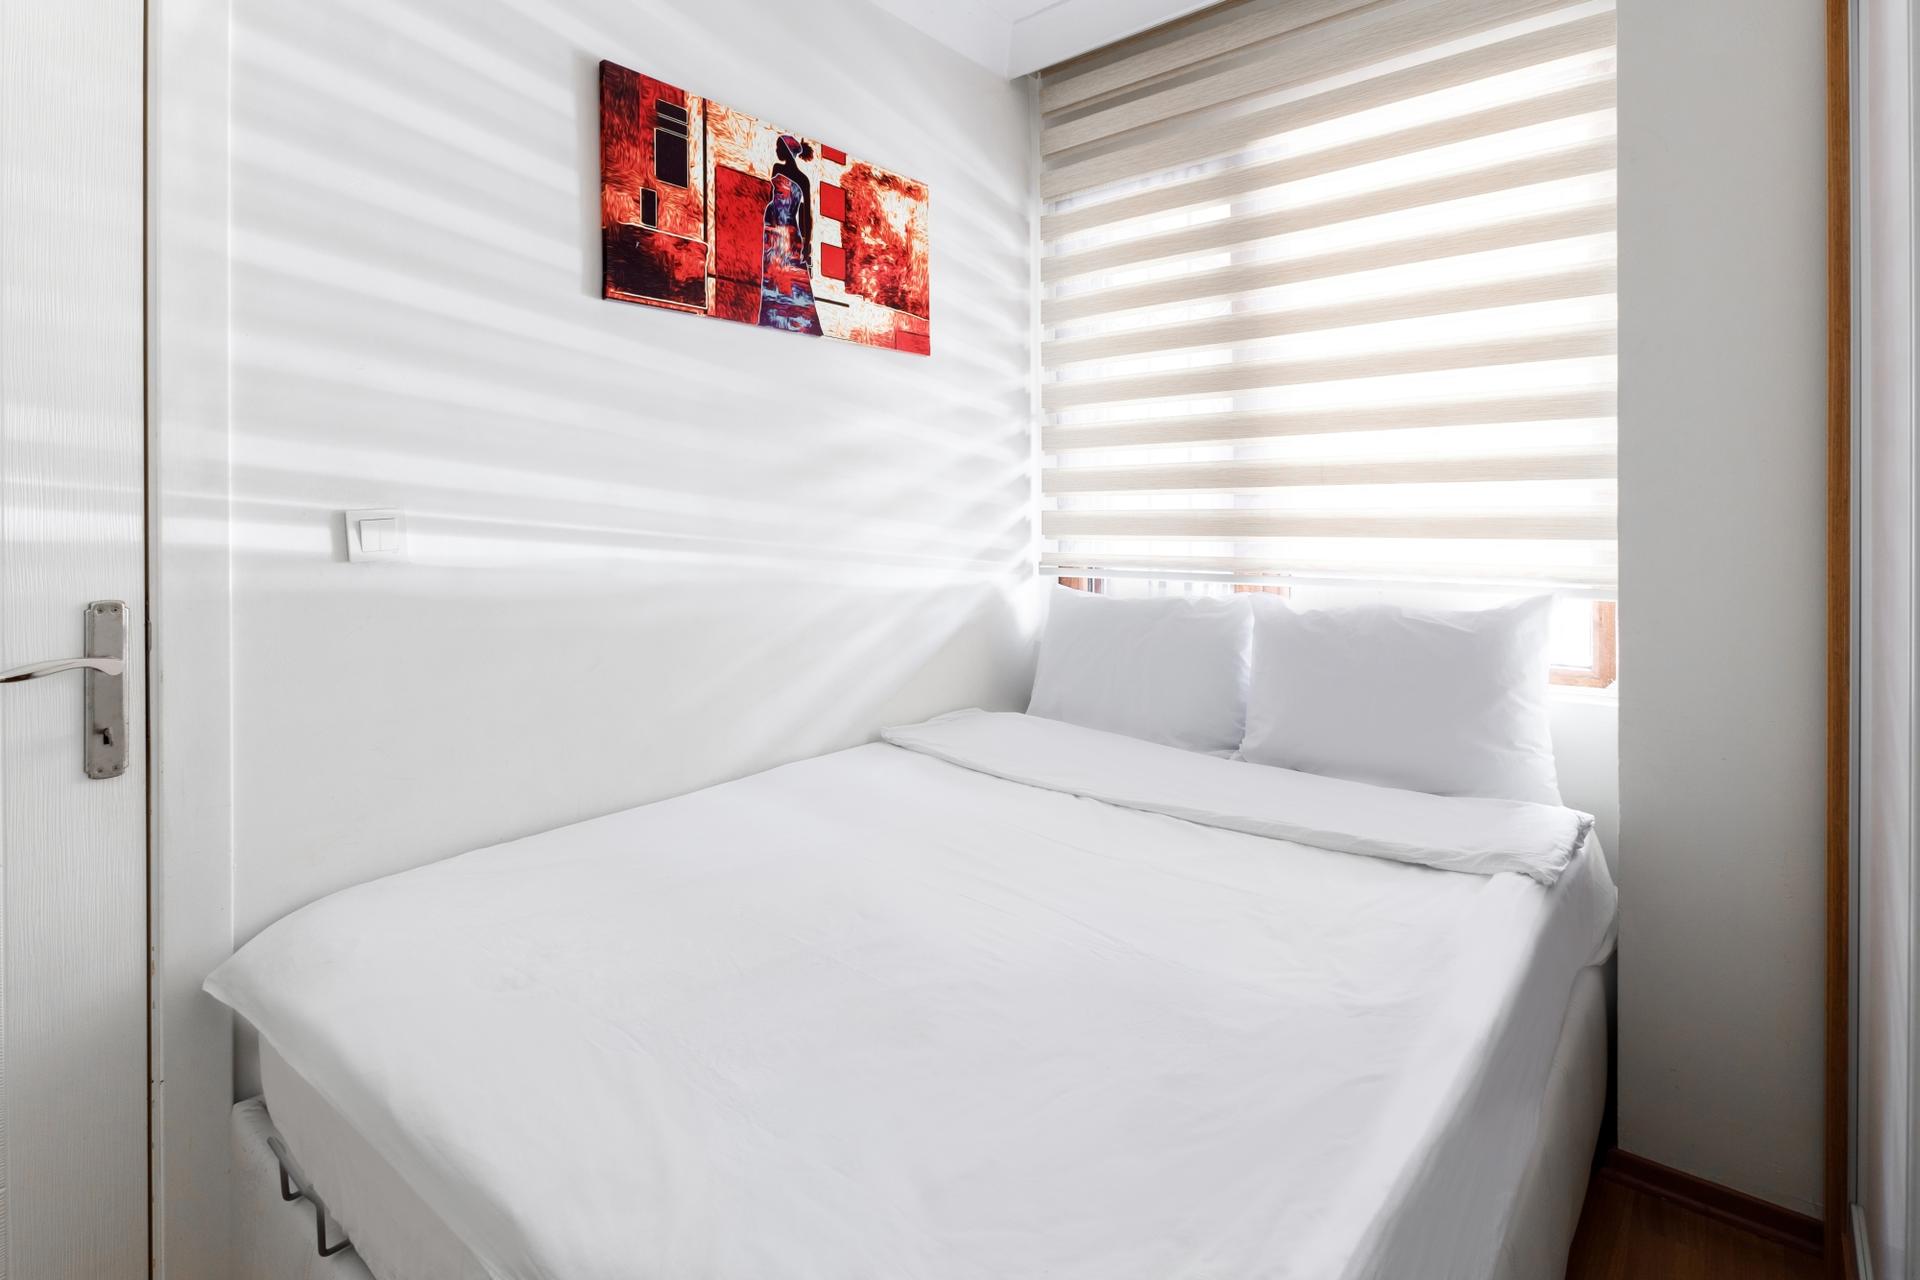 Relax and unwind in our cozy bedroom with a comfortable double bed.